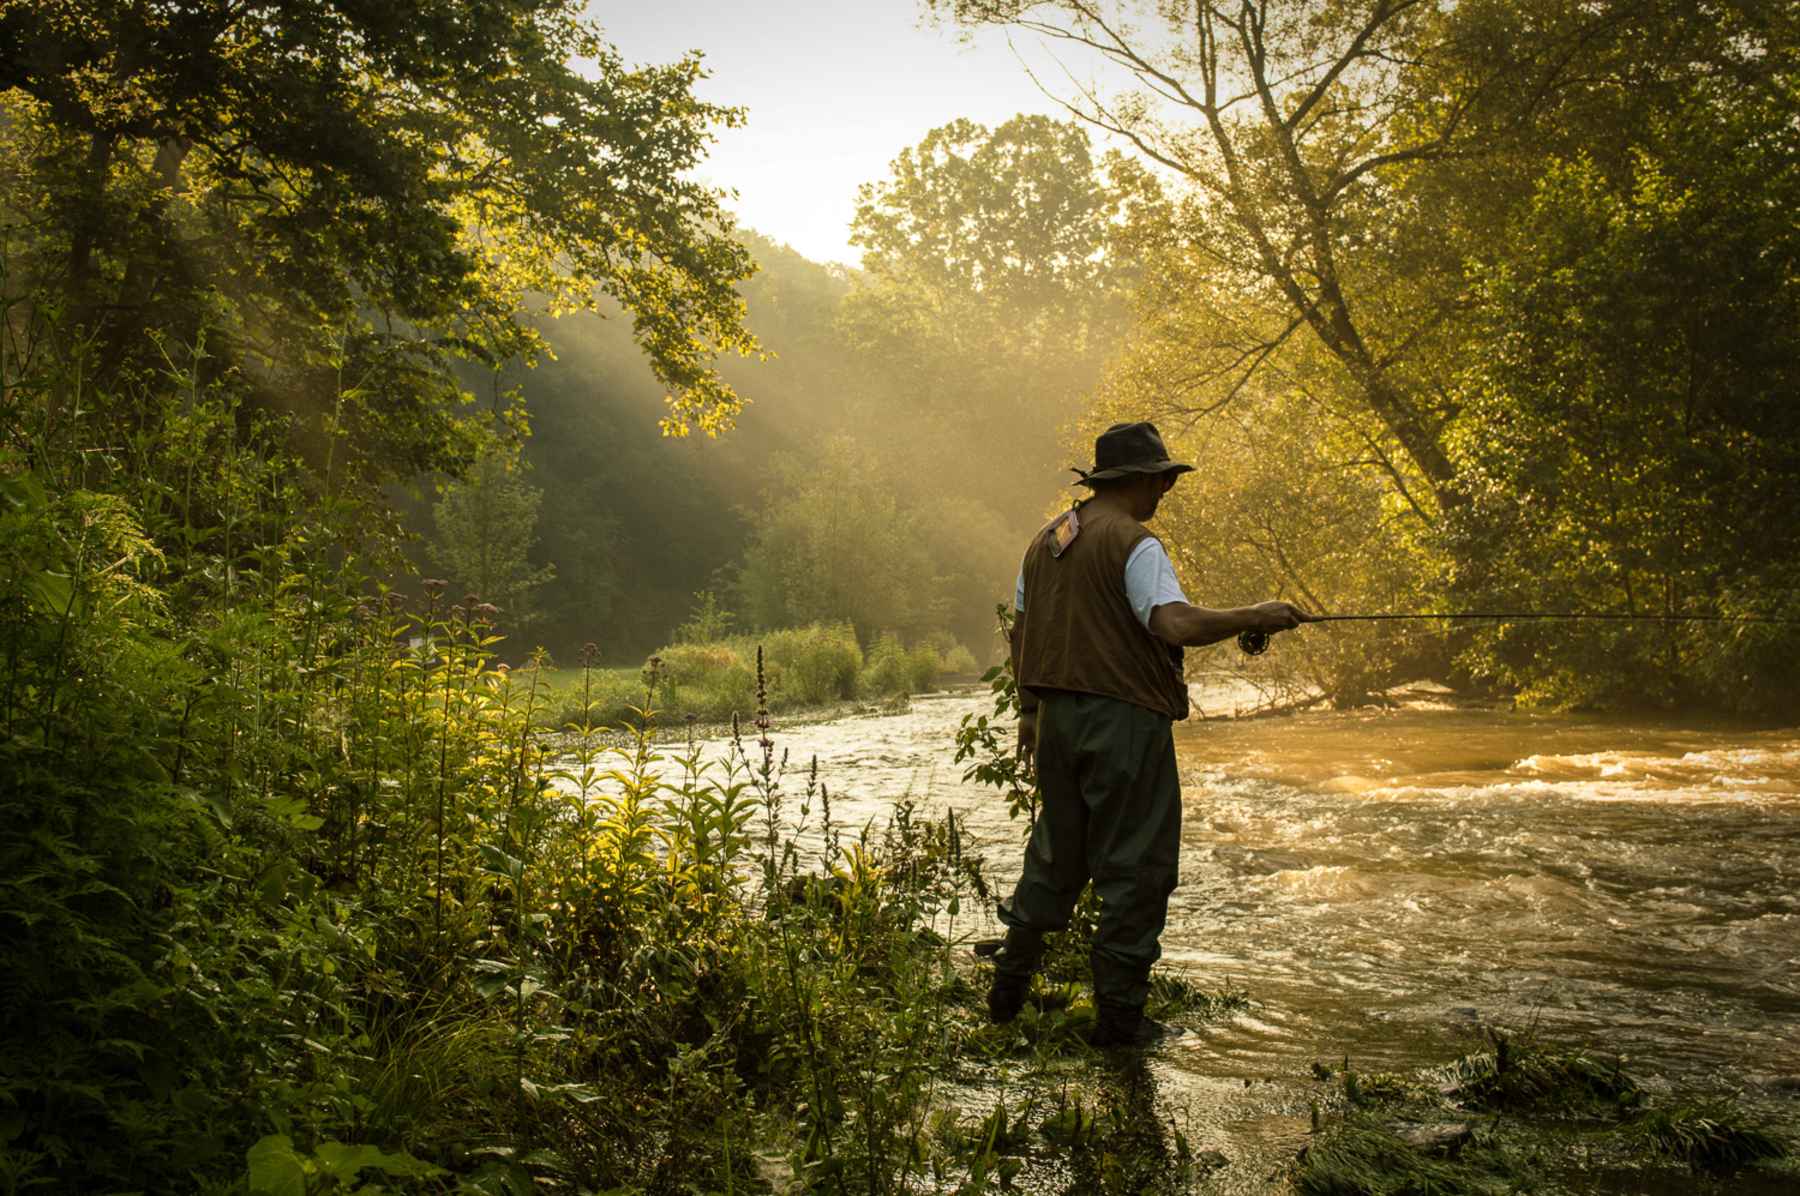 High light, low light: Tips for dealing with the sun when fishing